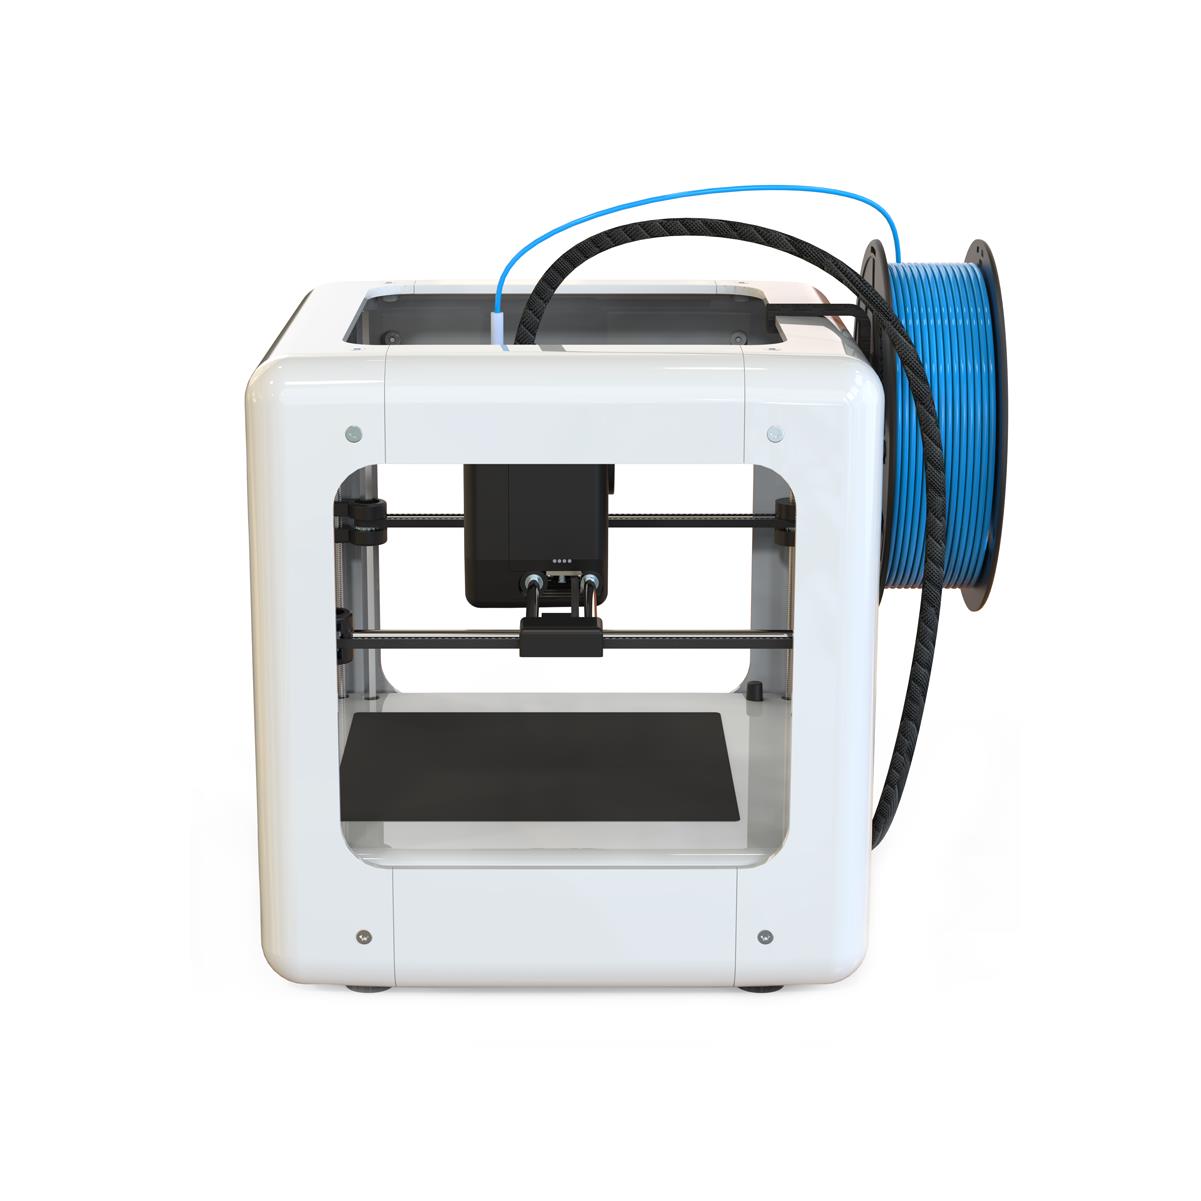 Easythreed® NANO Mini Fully Assembled 3D Printer for Household Education & Students 90*110*110mm Printing Size Support One Key Printing with 1.75m 16